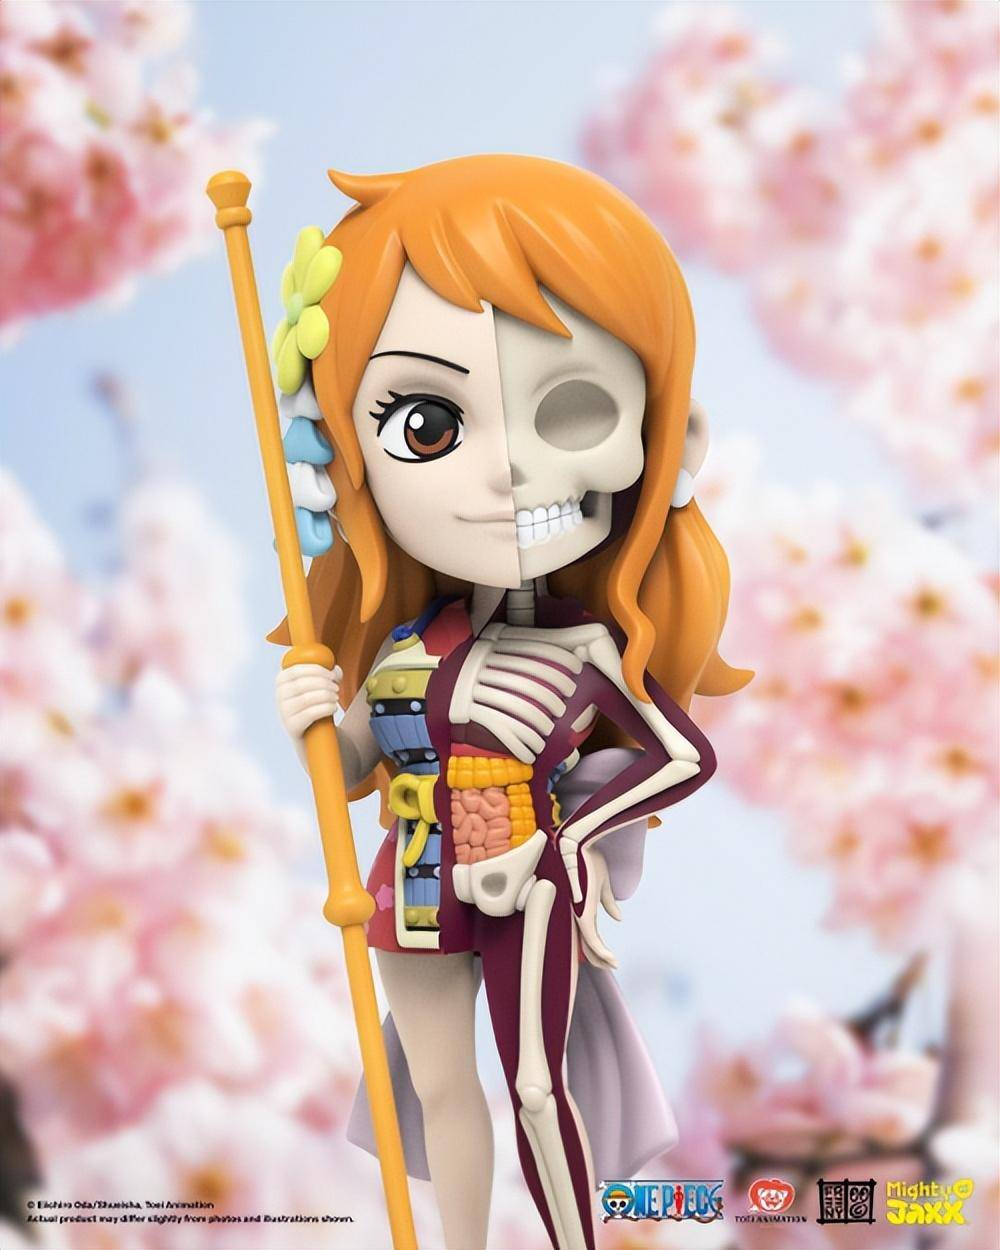 [Mighty Jaxx] ONE PIECE - Freeny's Hidden Dissectibles Series 5 Ladies Edition Blind Box